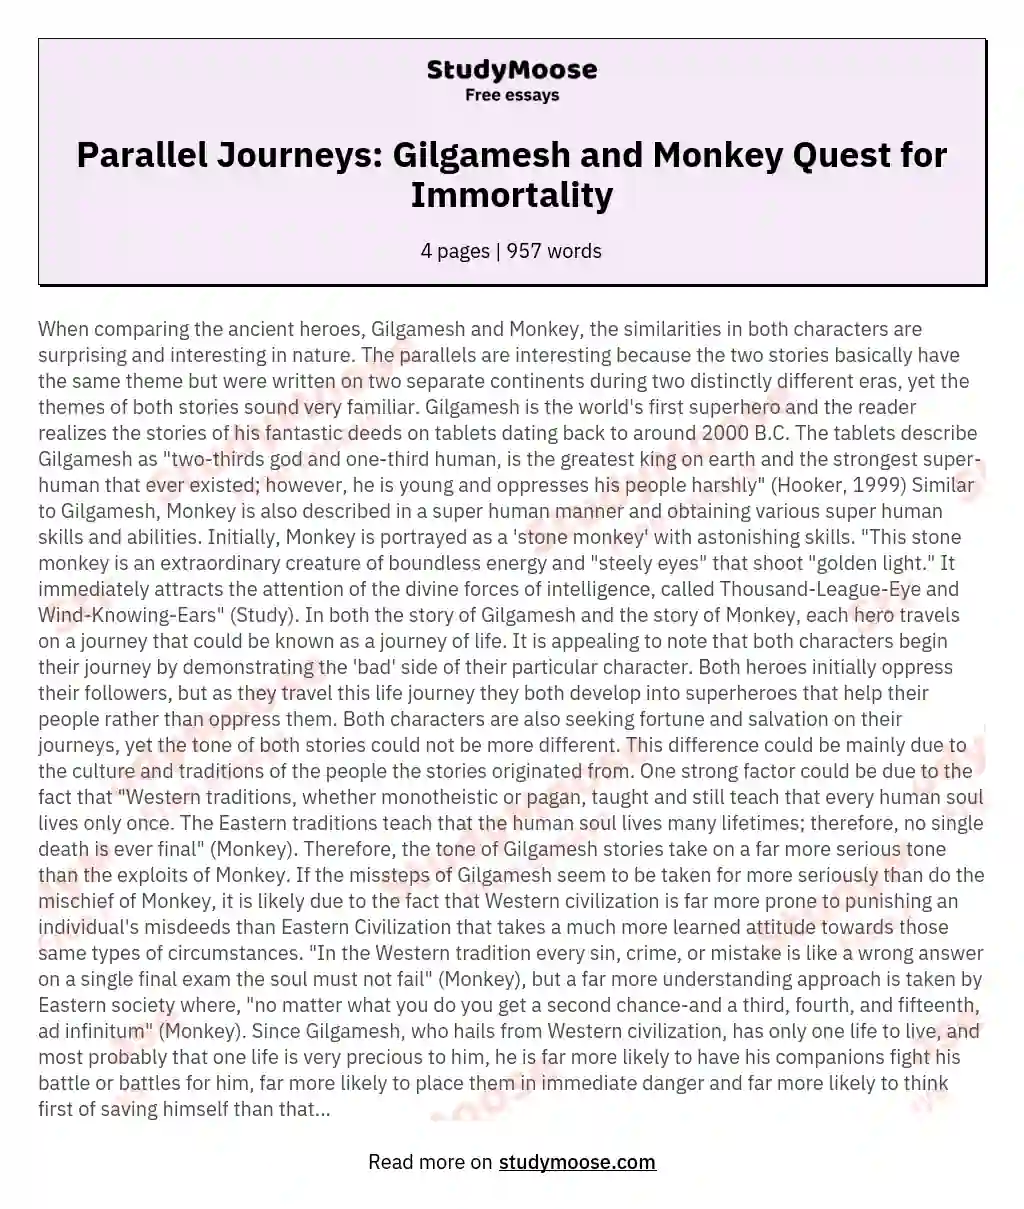 Parallel Journeys: Gilgamesh and Monkey Quest for Immortality essay